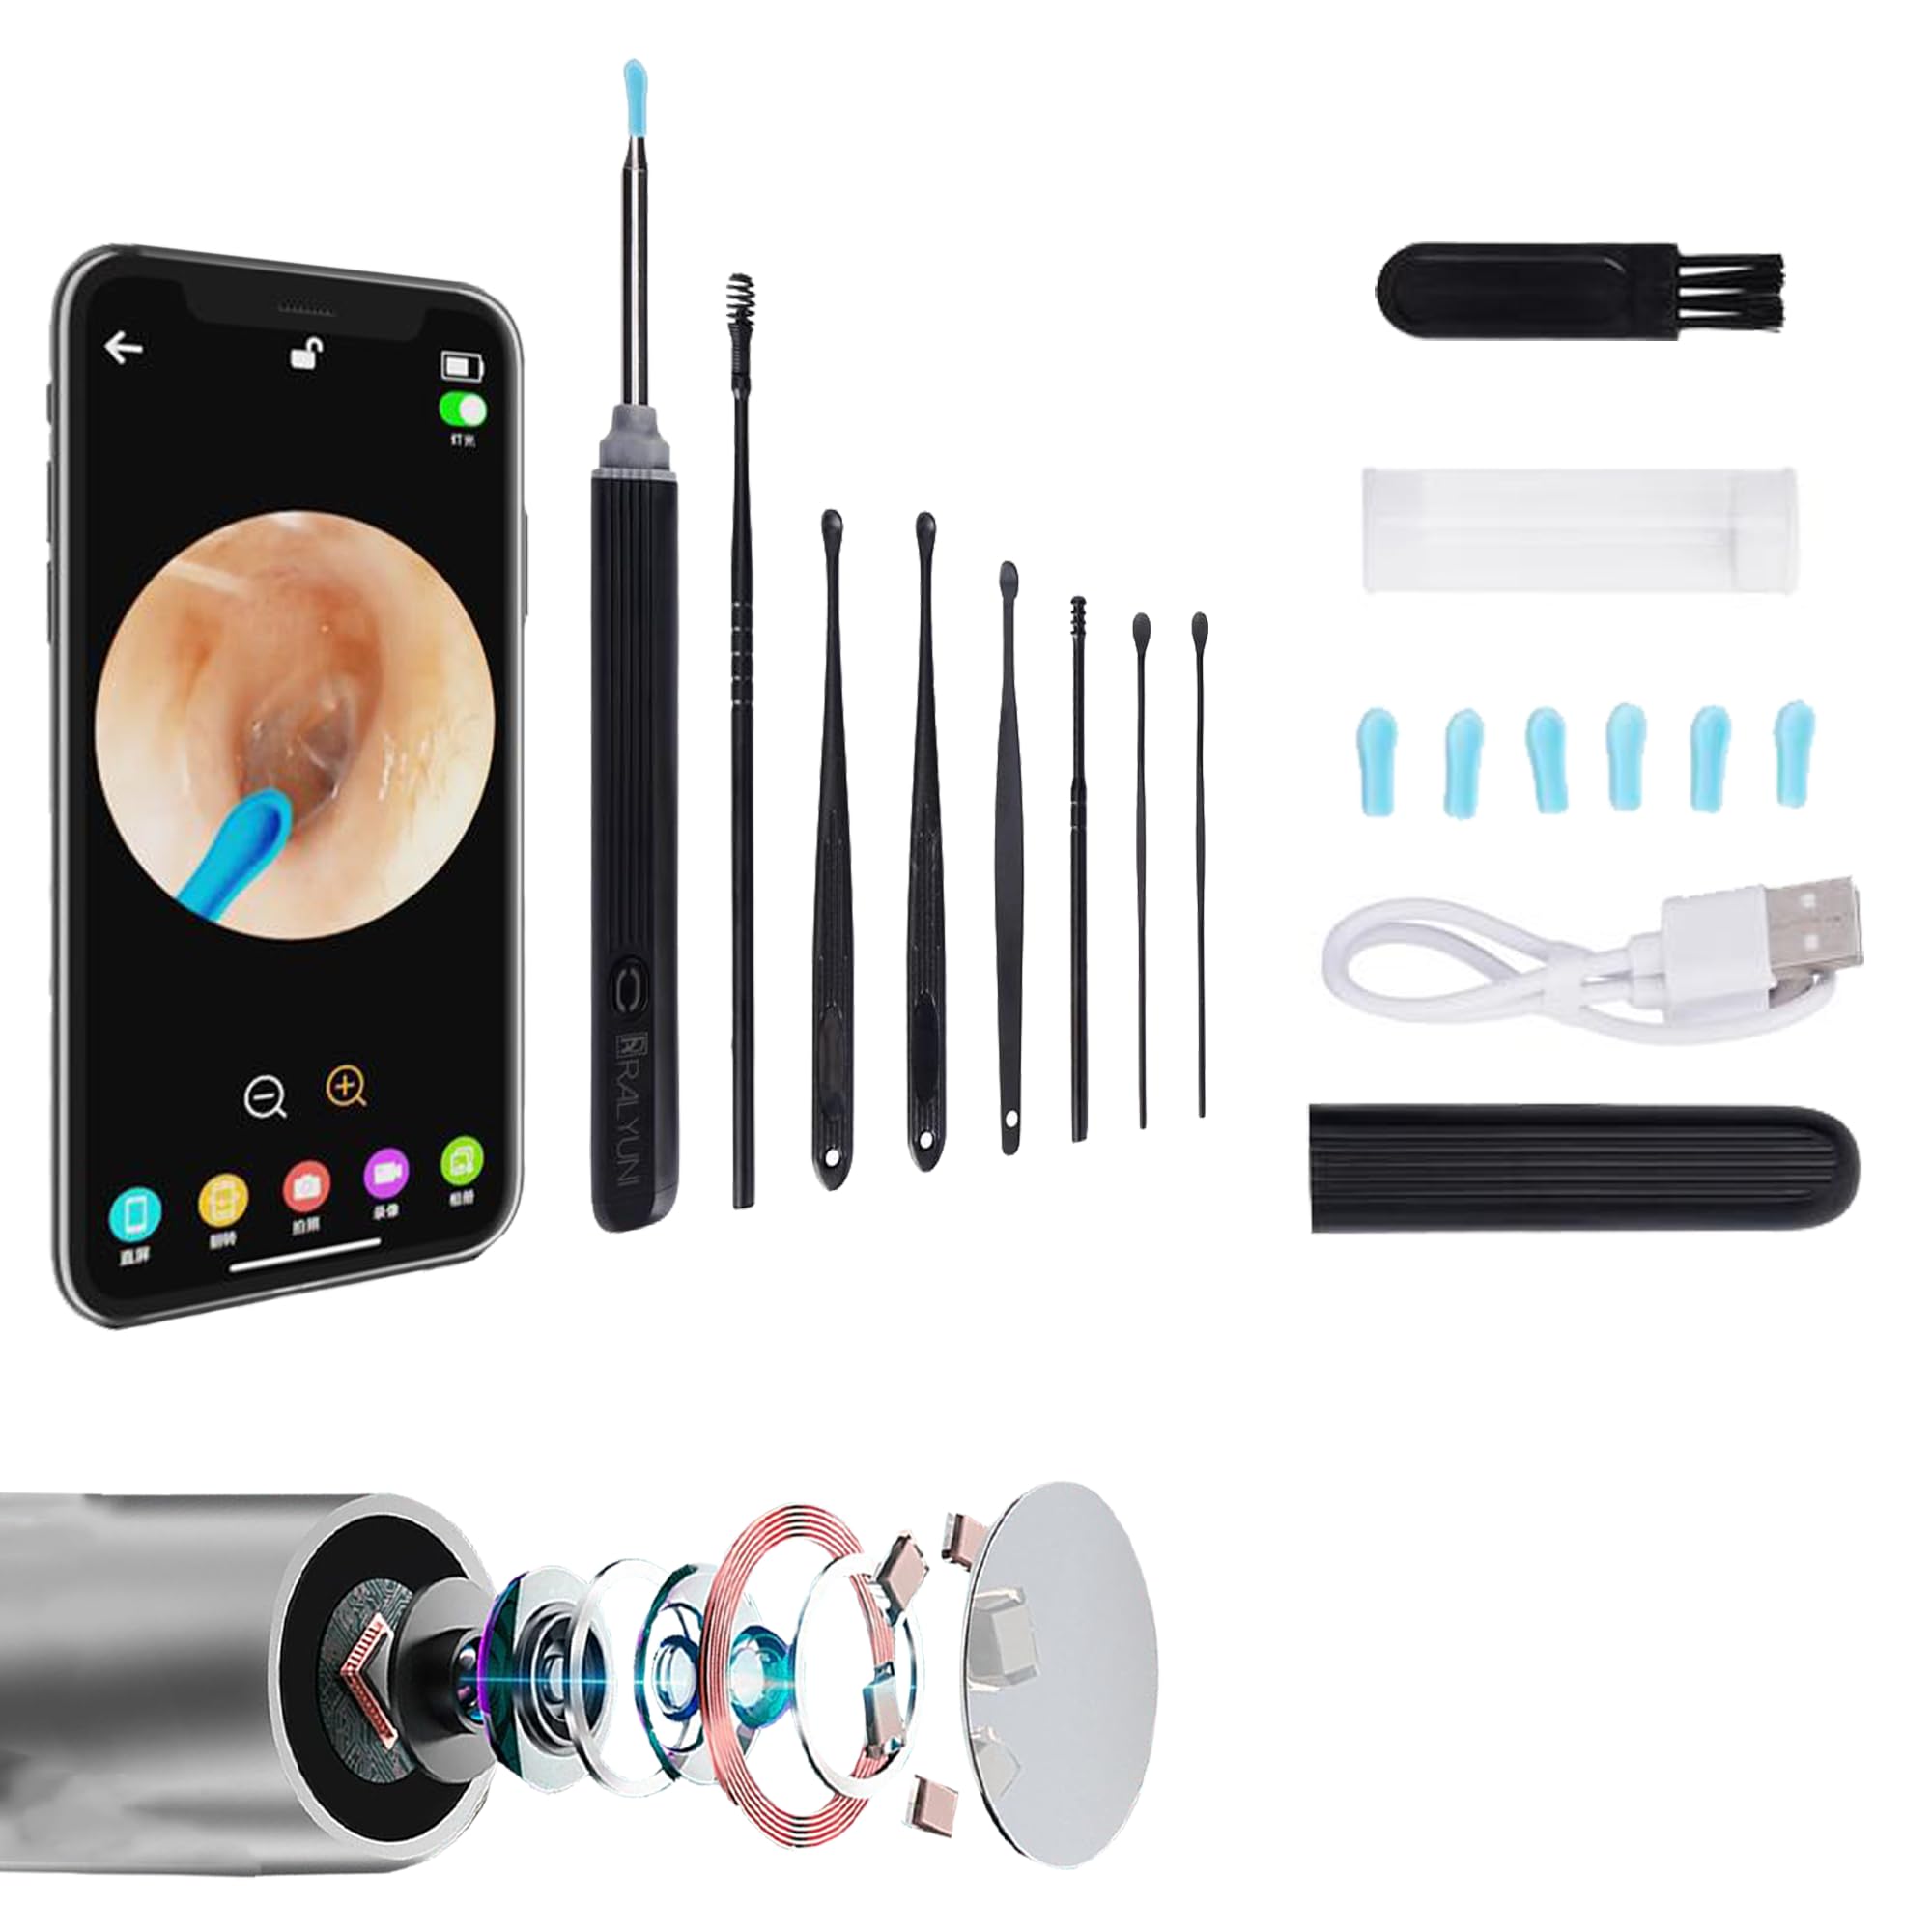 Ear Wax Removal with Camera - 1080P HD Ear Cleaning Kit, 8 PCS Set, for Smartphones and Tablets